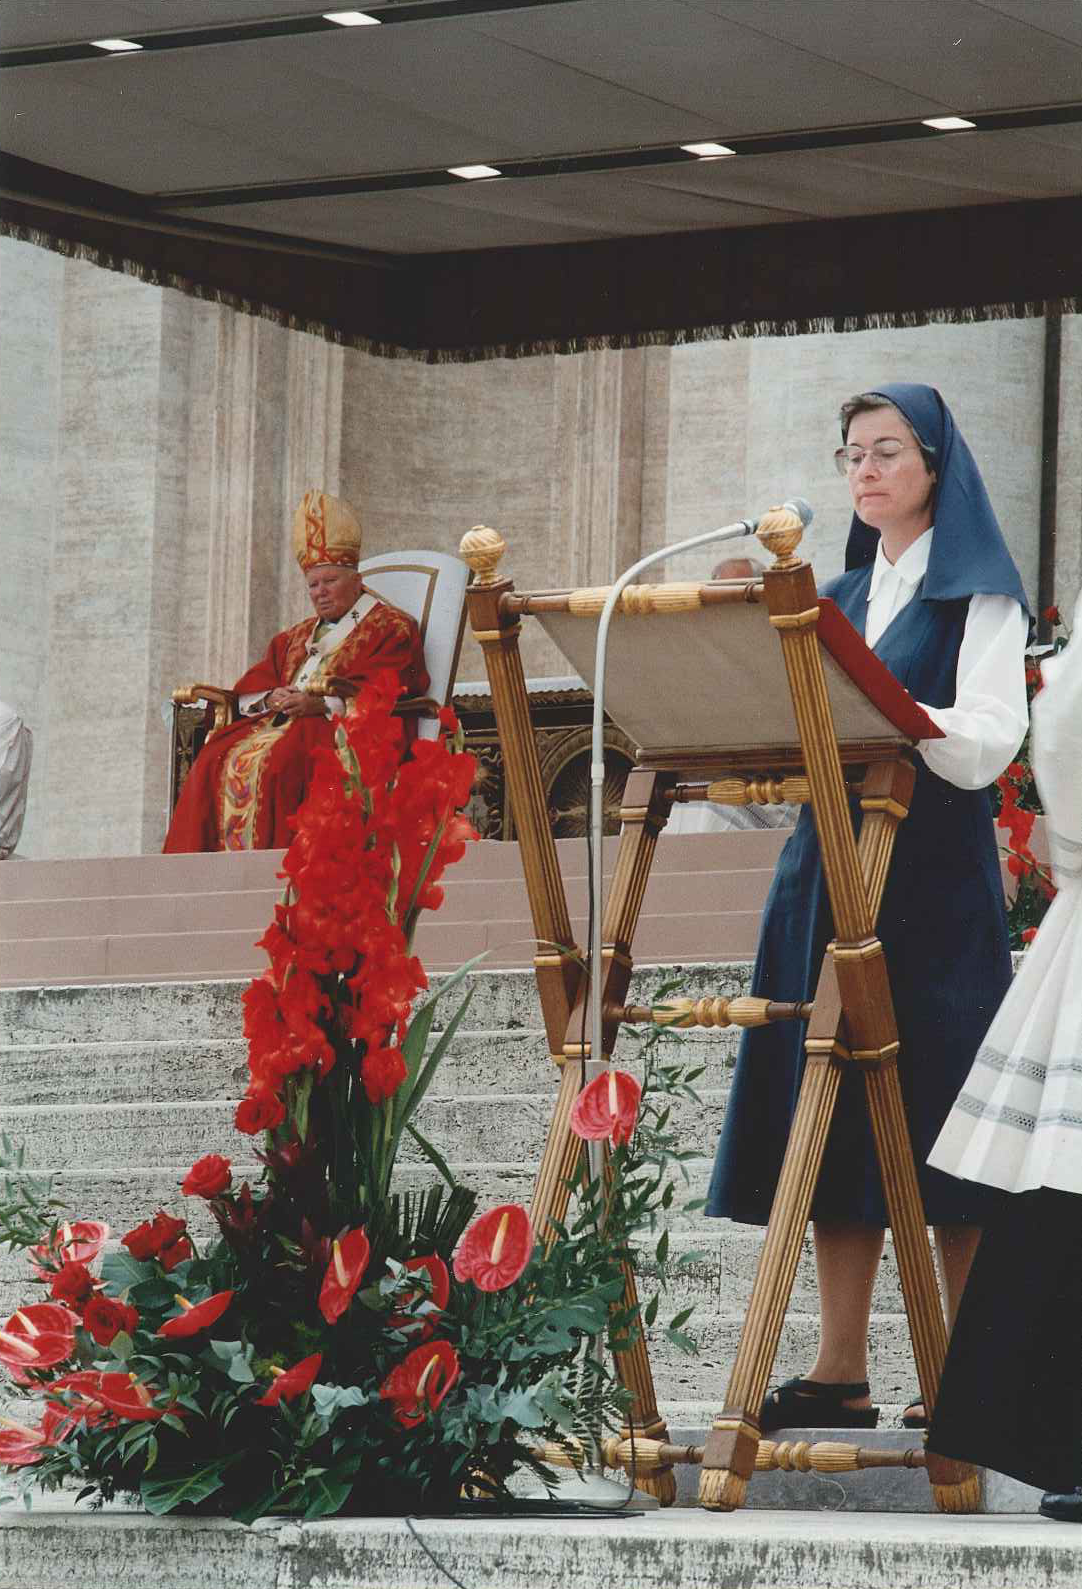 Sr. Anne singing for the Pope